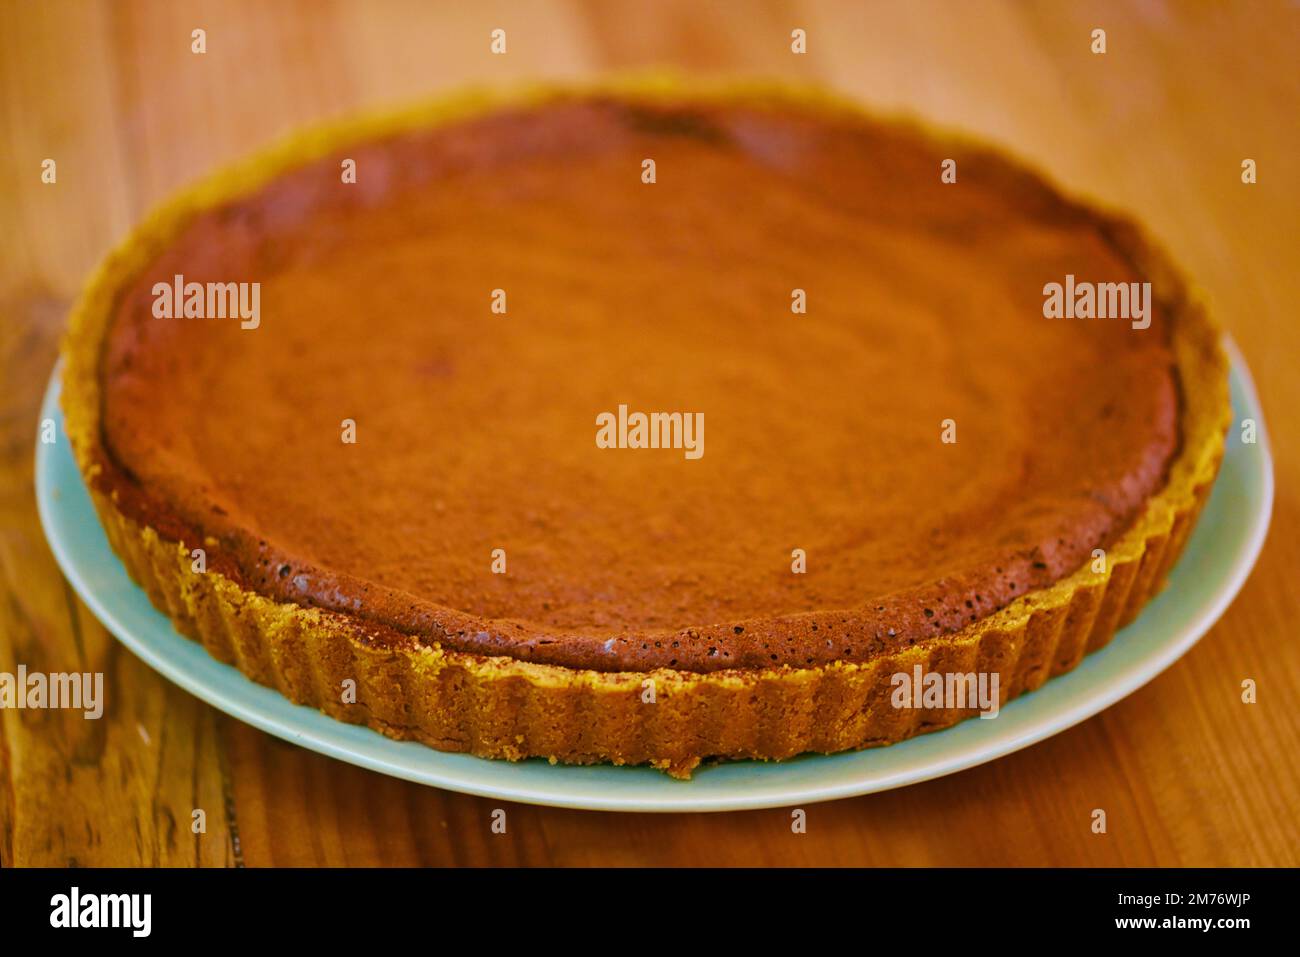 Pie thats pleasing to the eye. a delicious chocolate pie resting on a plate. Stock Photo